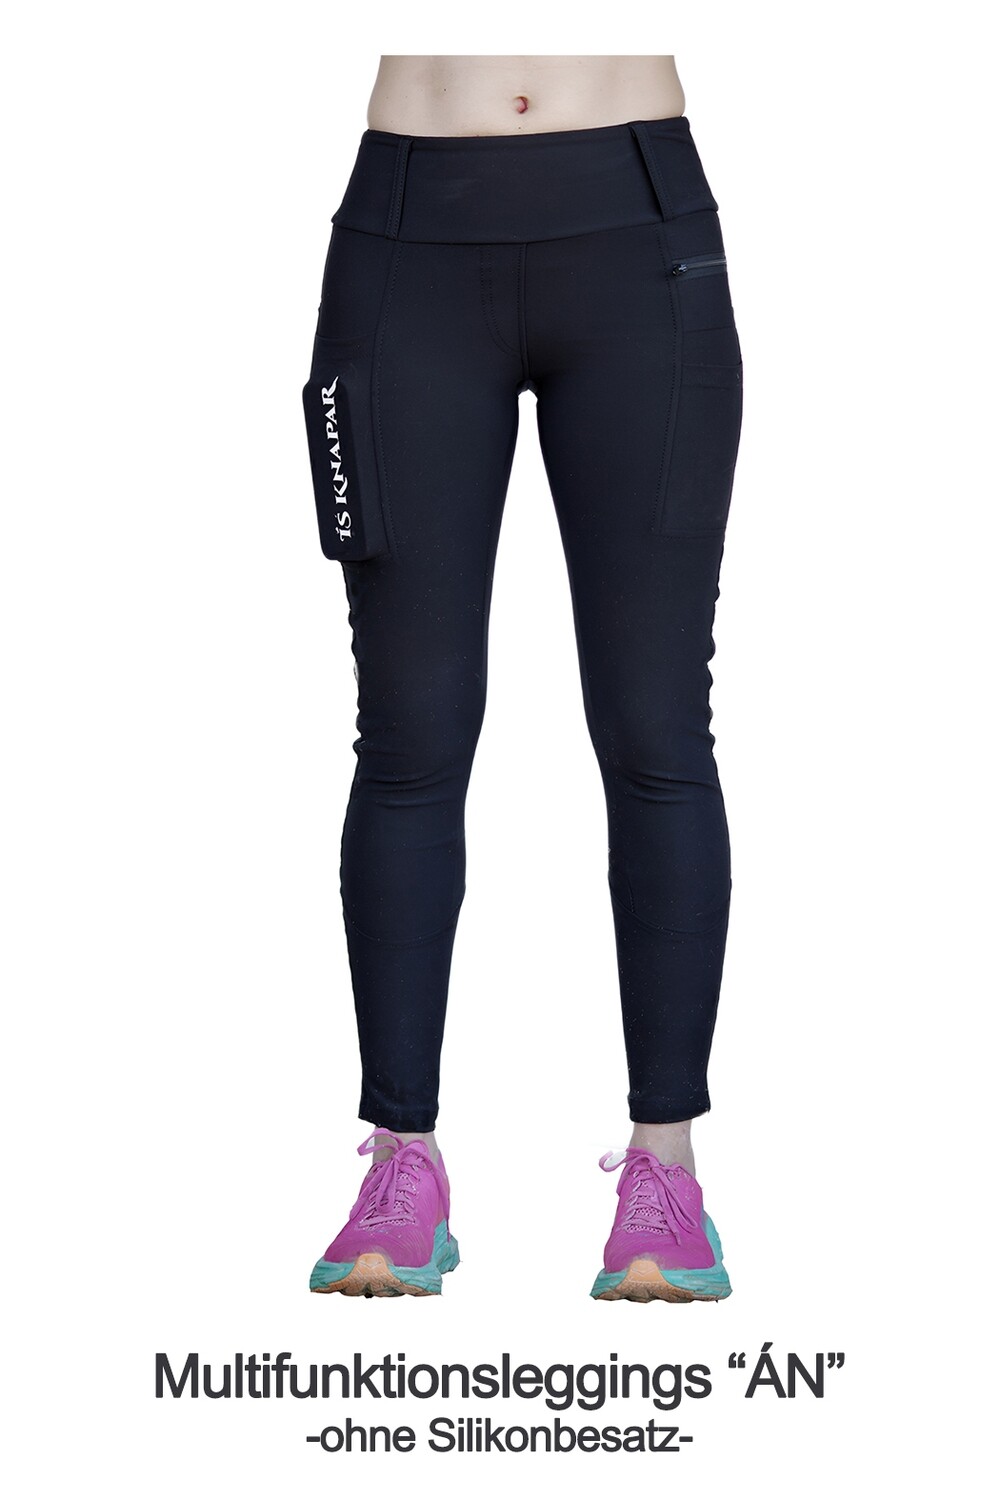 ÁN - our popular riding leggings without grip